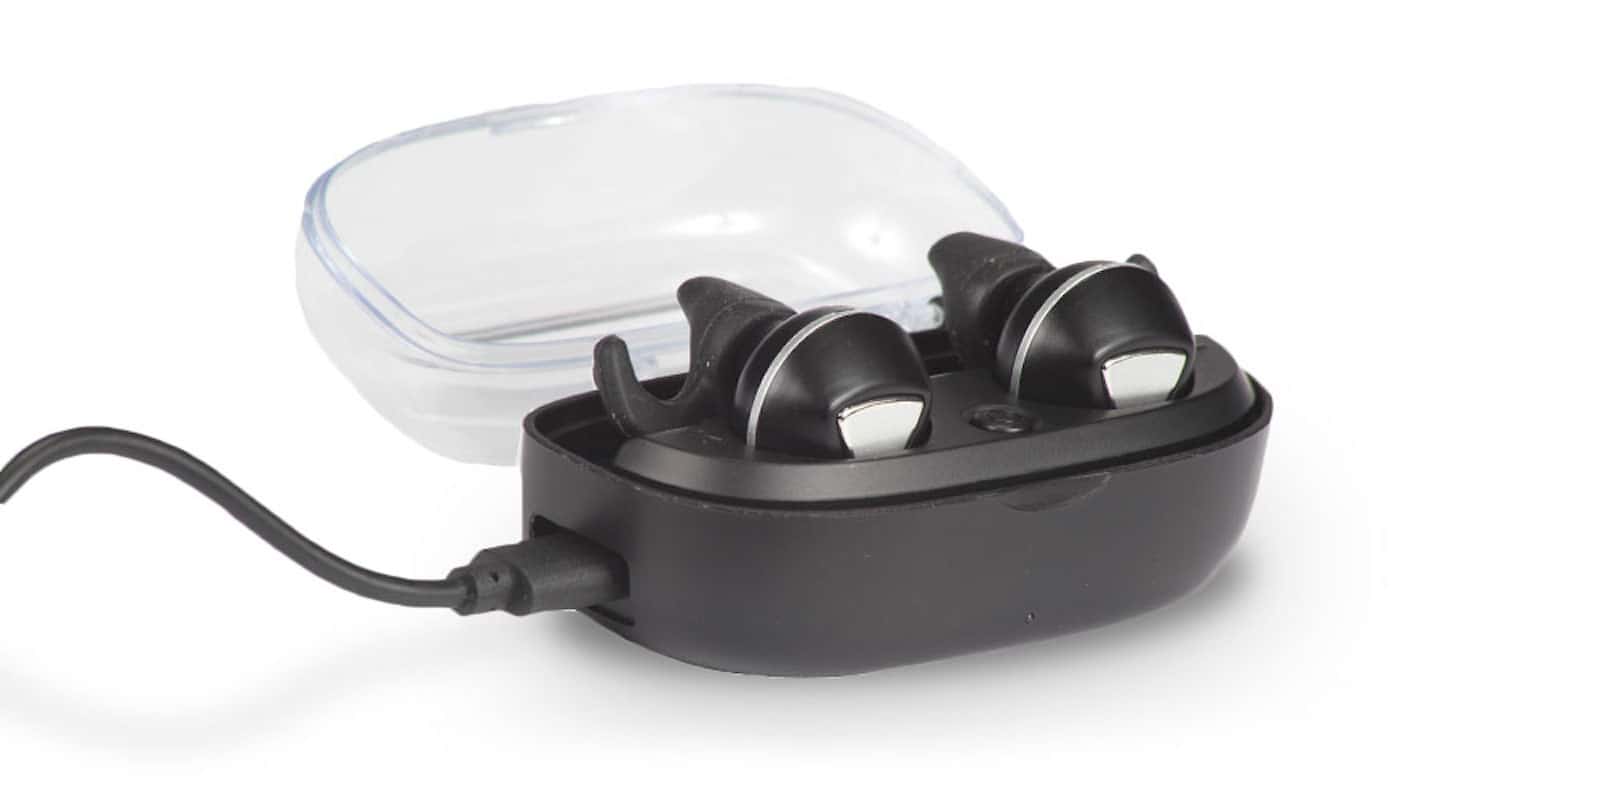 1Voice Wireless In-Ear Headphones with Charging Case